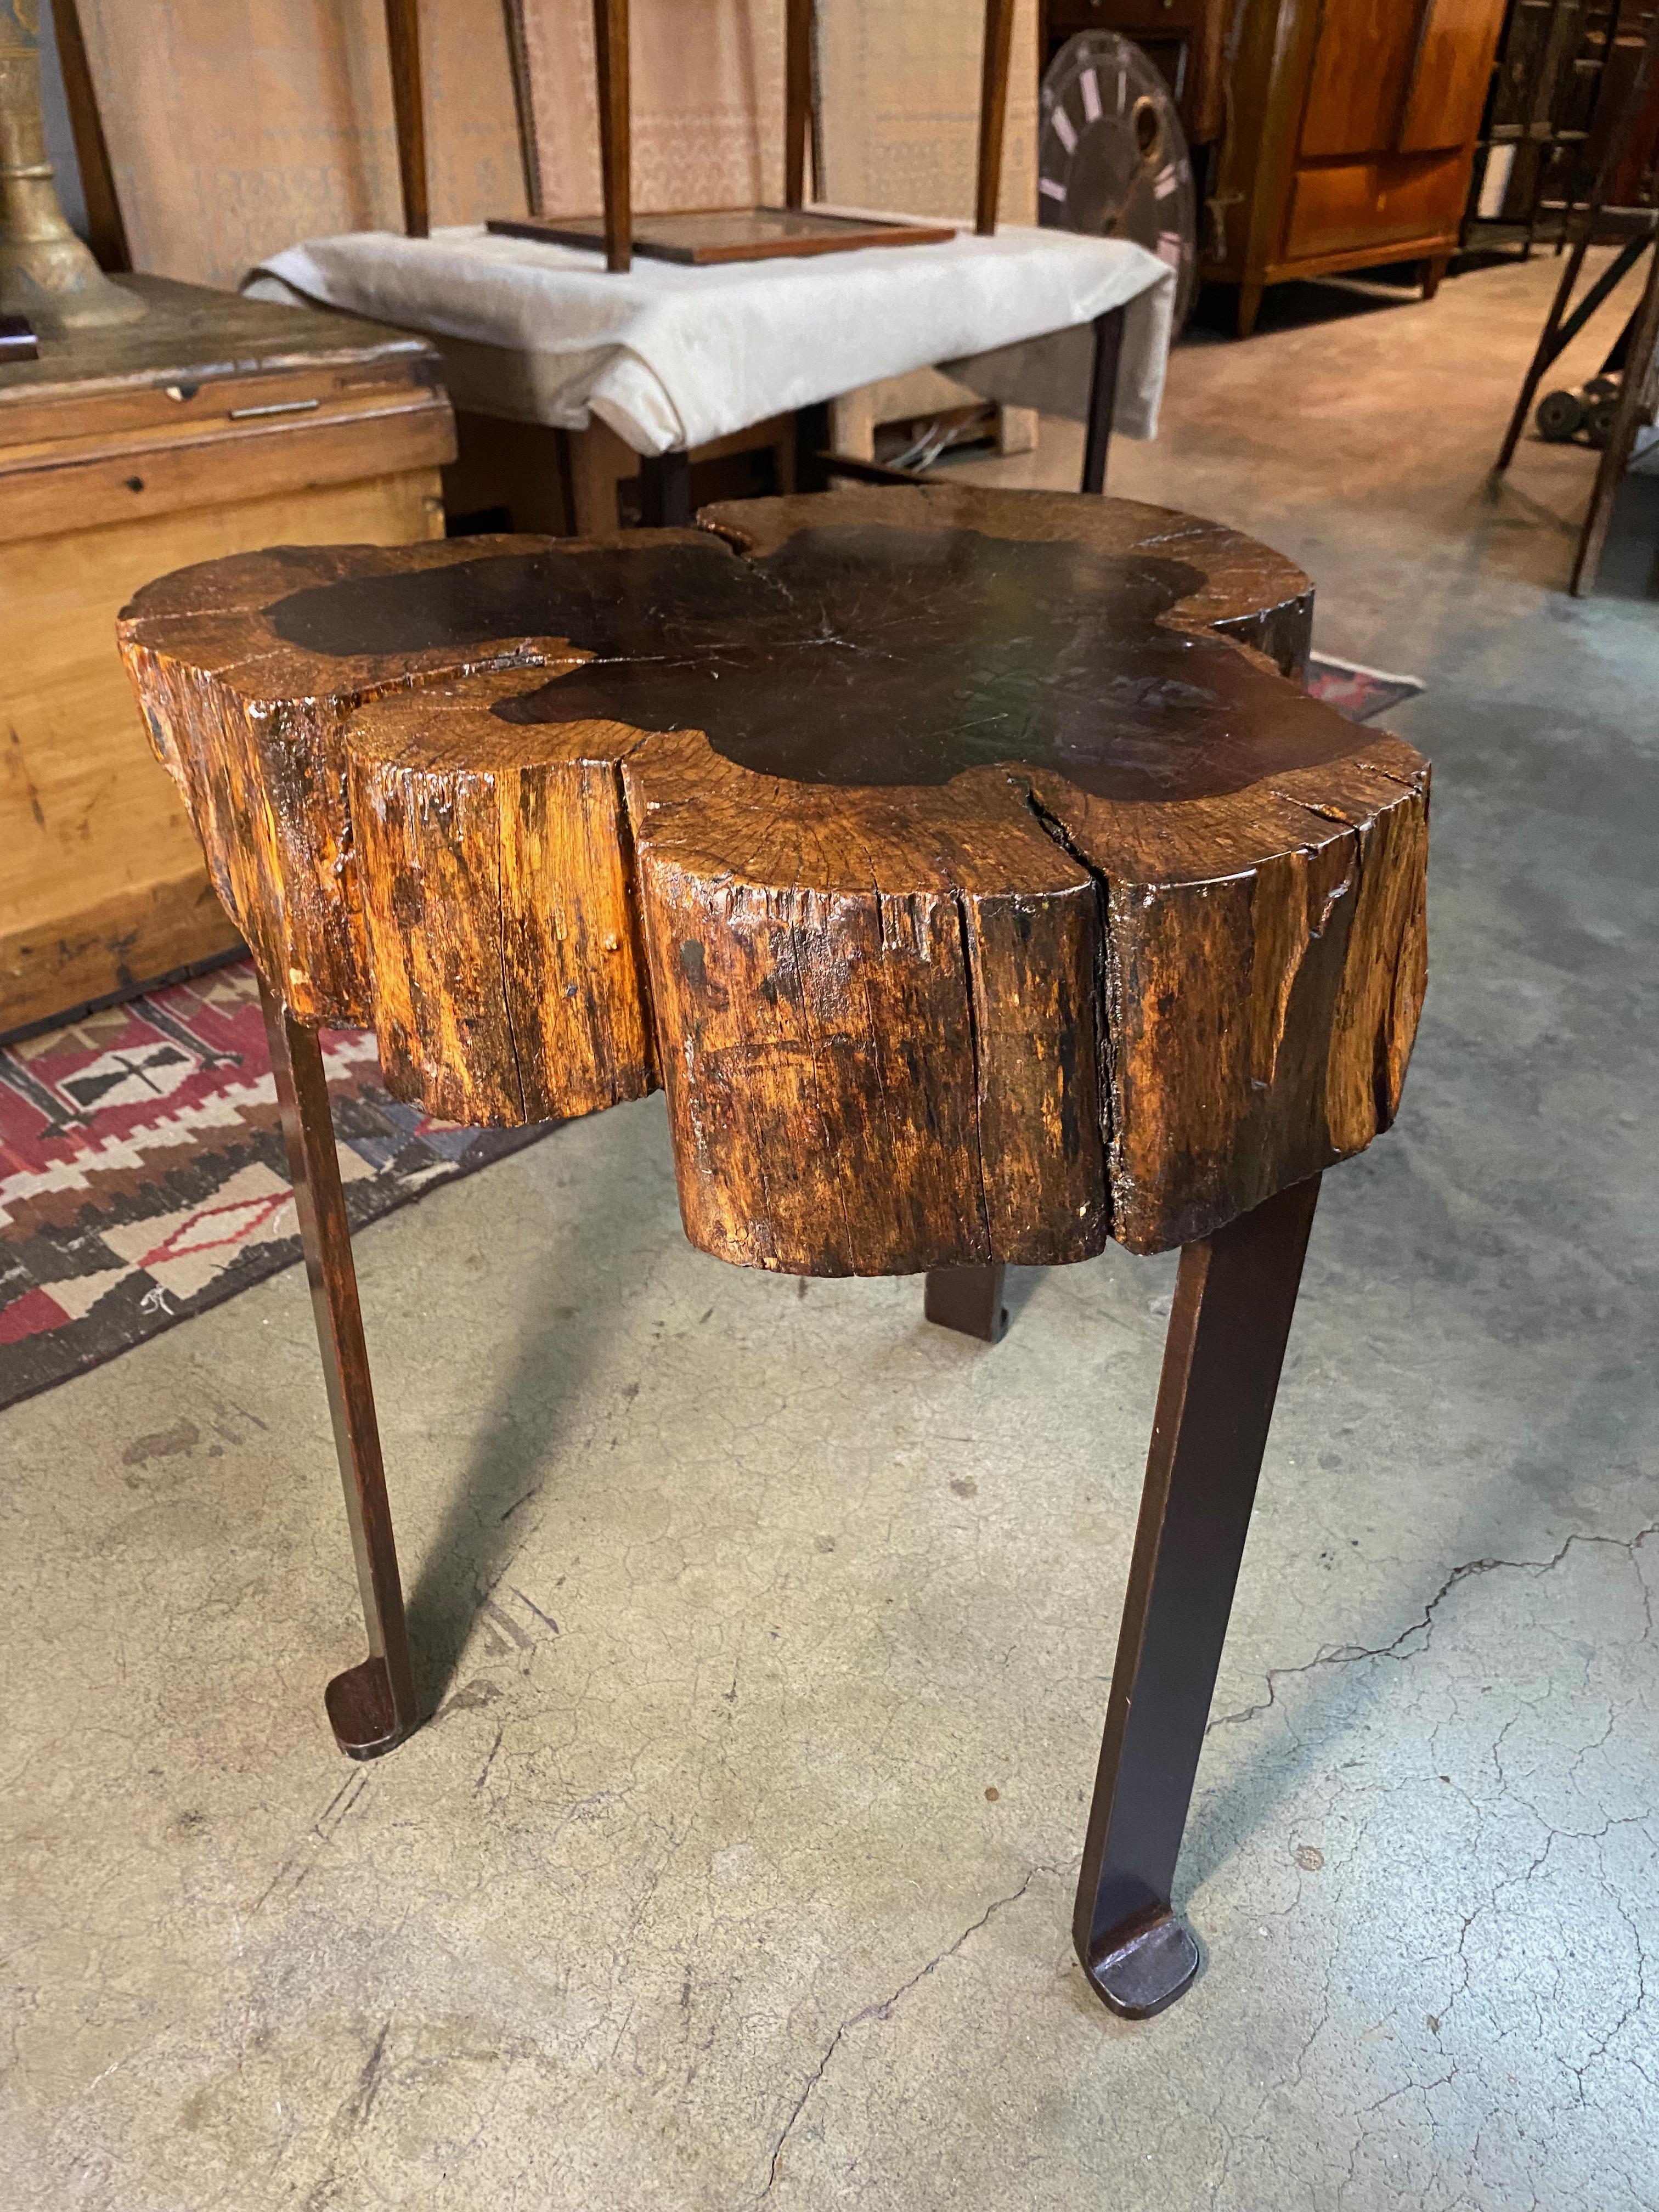 Introducing an exquisite and unique Vintage 1970s side salon table with Santos Rosewood. This exceptional piece of furniture is sure to catch the eye of any antique collector or design enthusiast, with its rare and stunning combination of materials